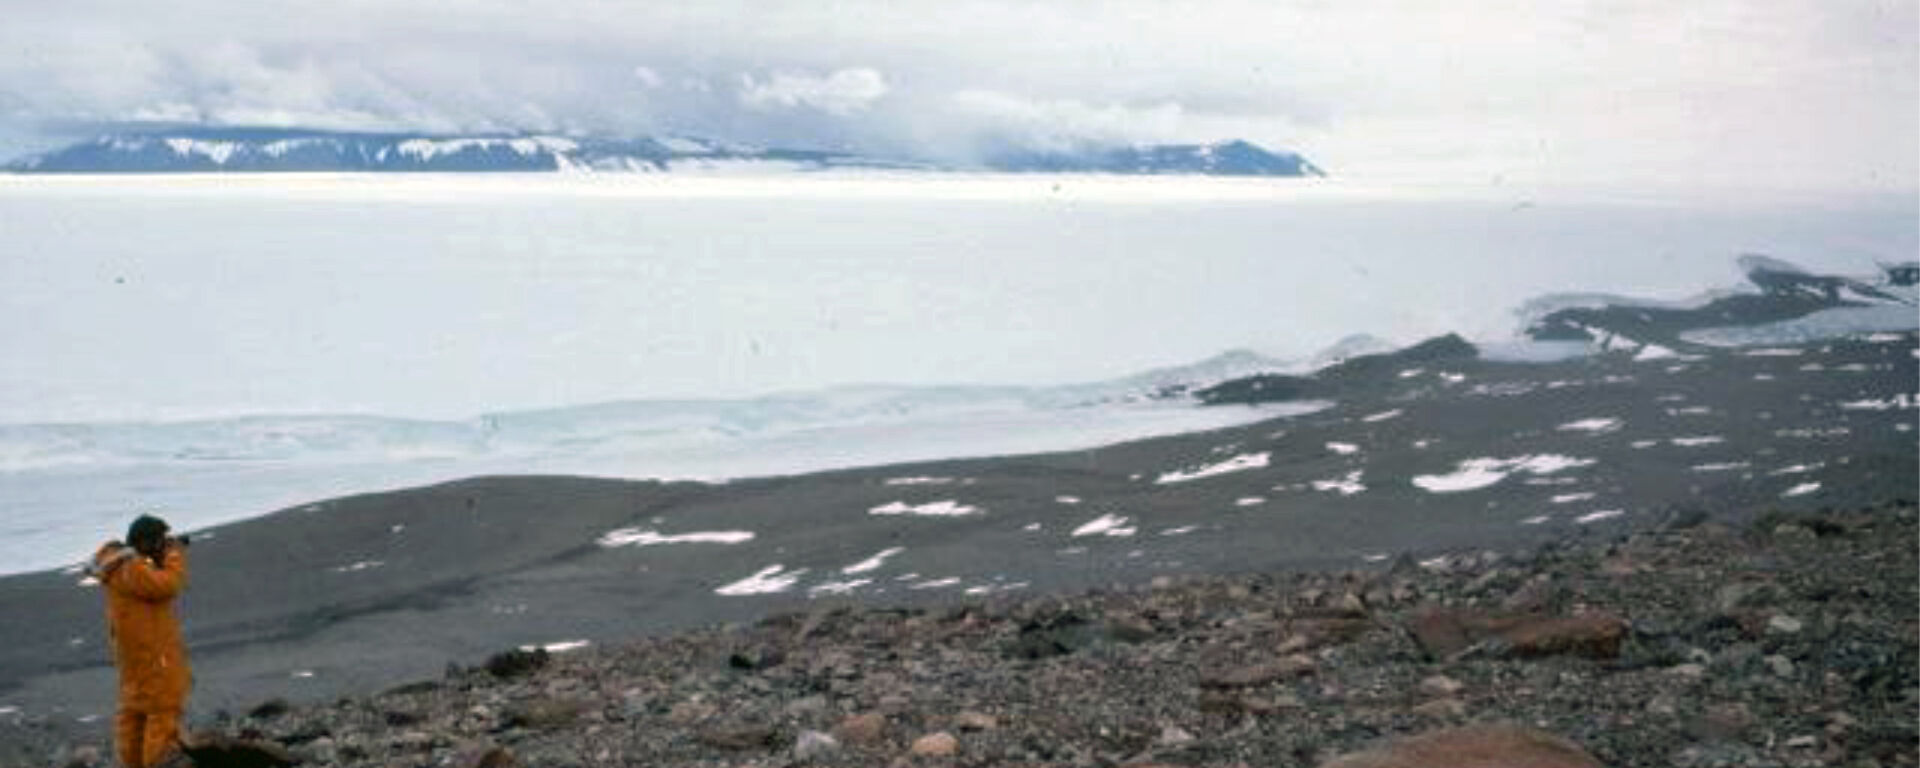 The site from which the Antarctic kimberlite samples were recovered, on the flanks of Mt Meredith, looking across the Lambert Glacier